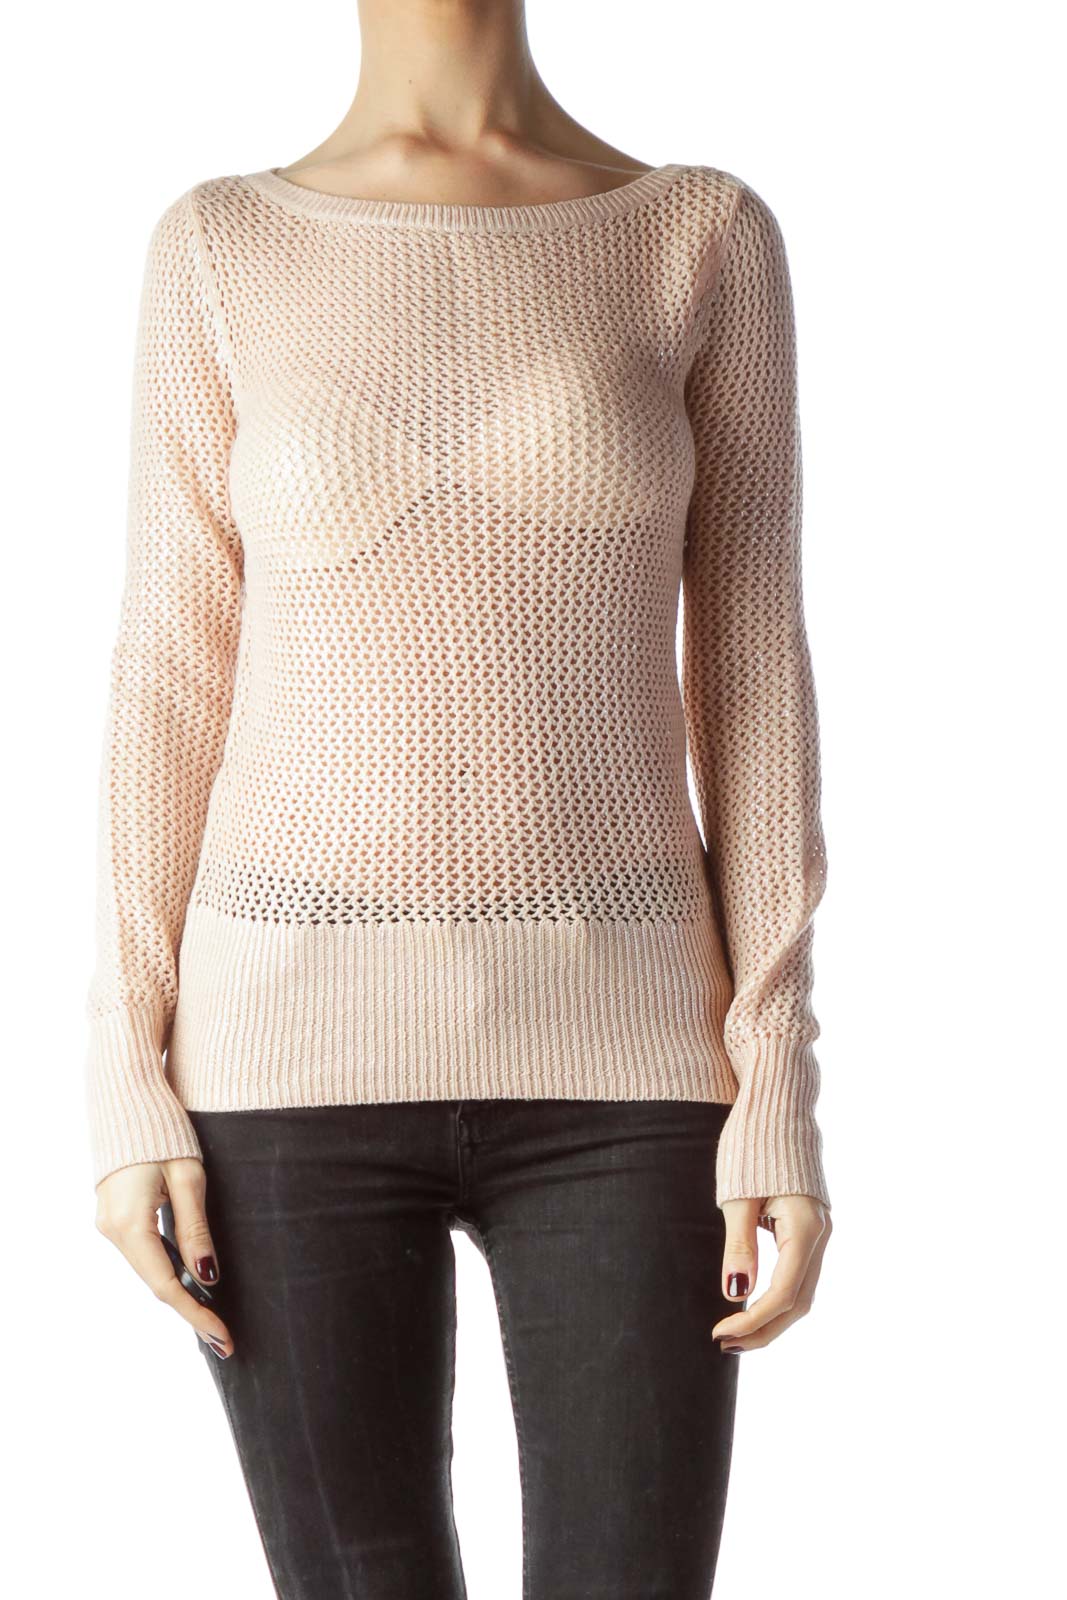 Salmon Pink Metallic Knitted Top Front